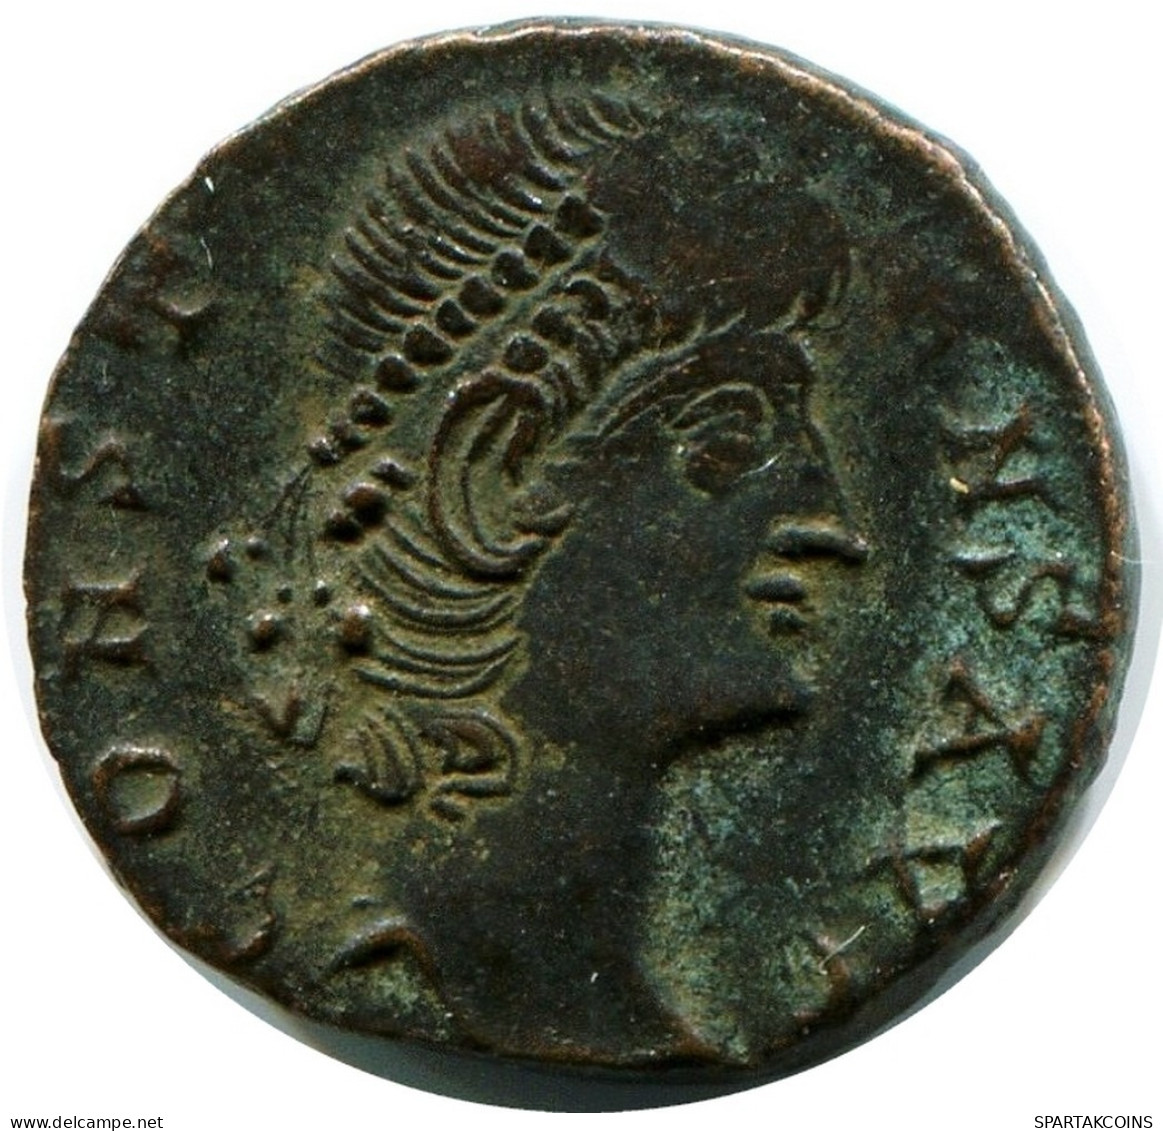 CONSTANS MINTED IN ANTIOCH FOUND IN IHNASYAH HOARD EGYPT #ANC11805.14.F.A - El Impero Christiano (307 / 363)